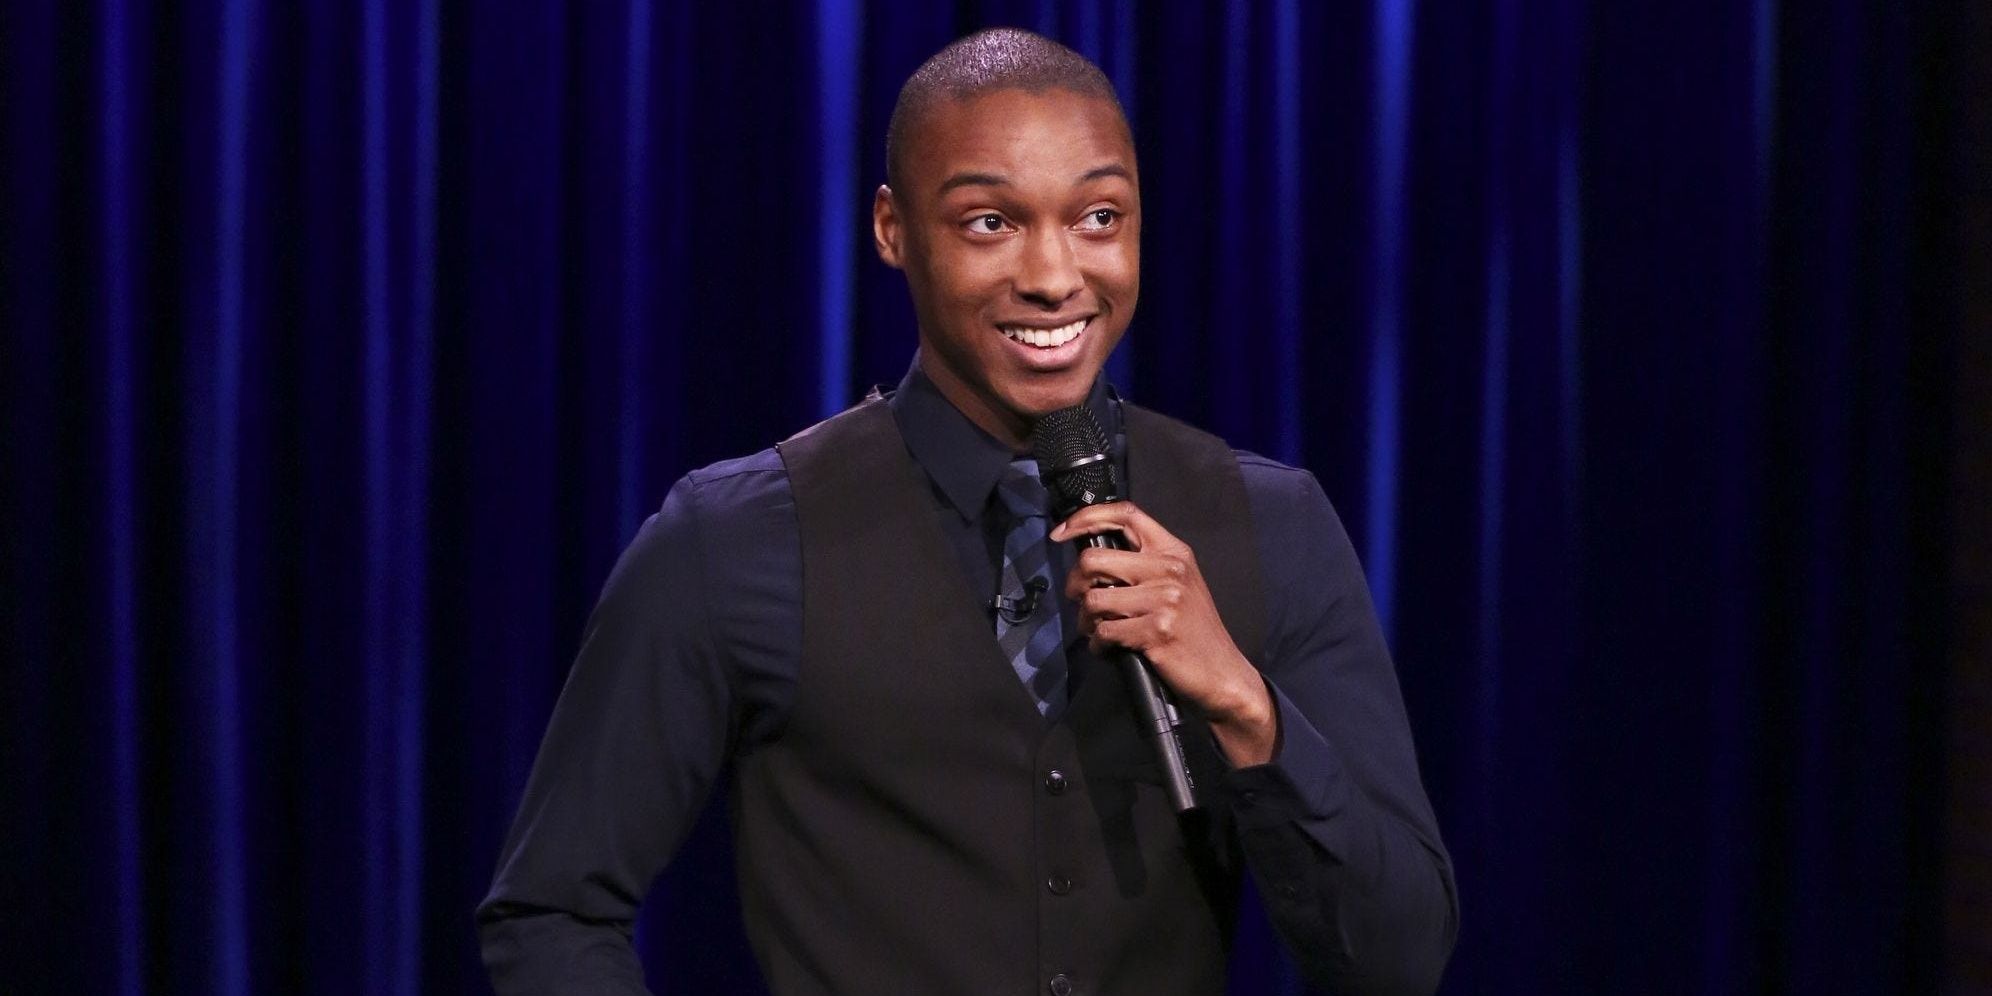 Josh Johnson during one of his stand-up comedy gigs in New York